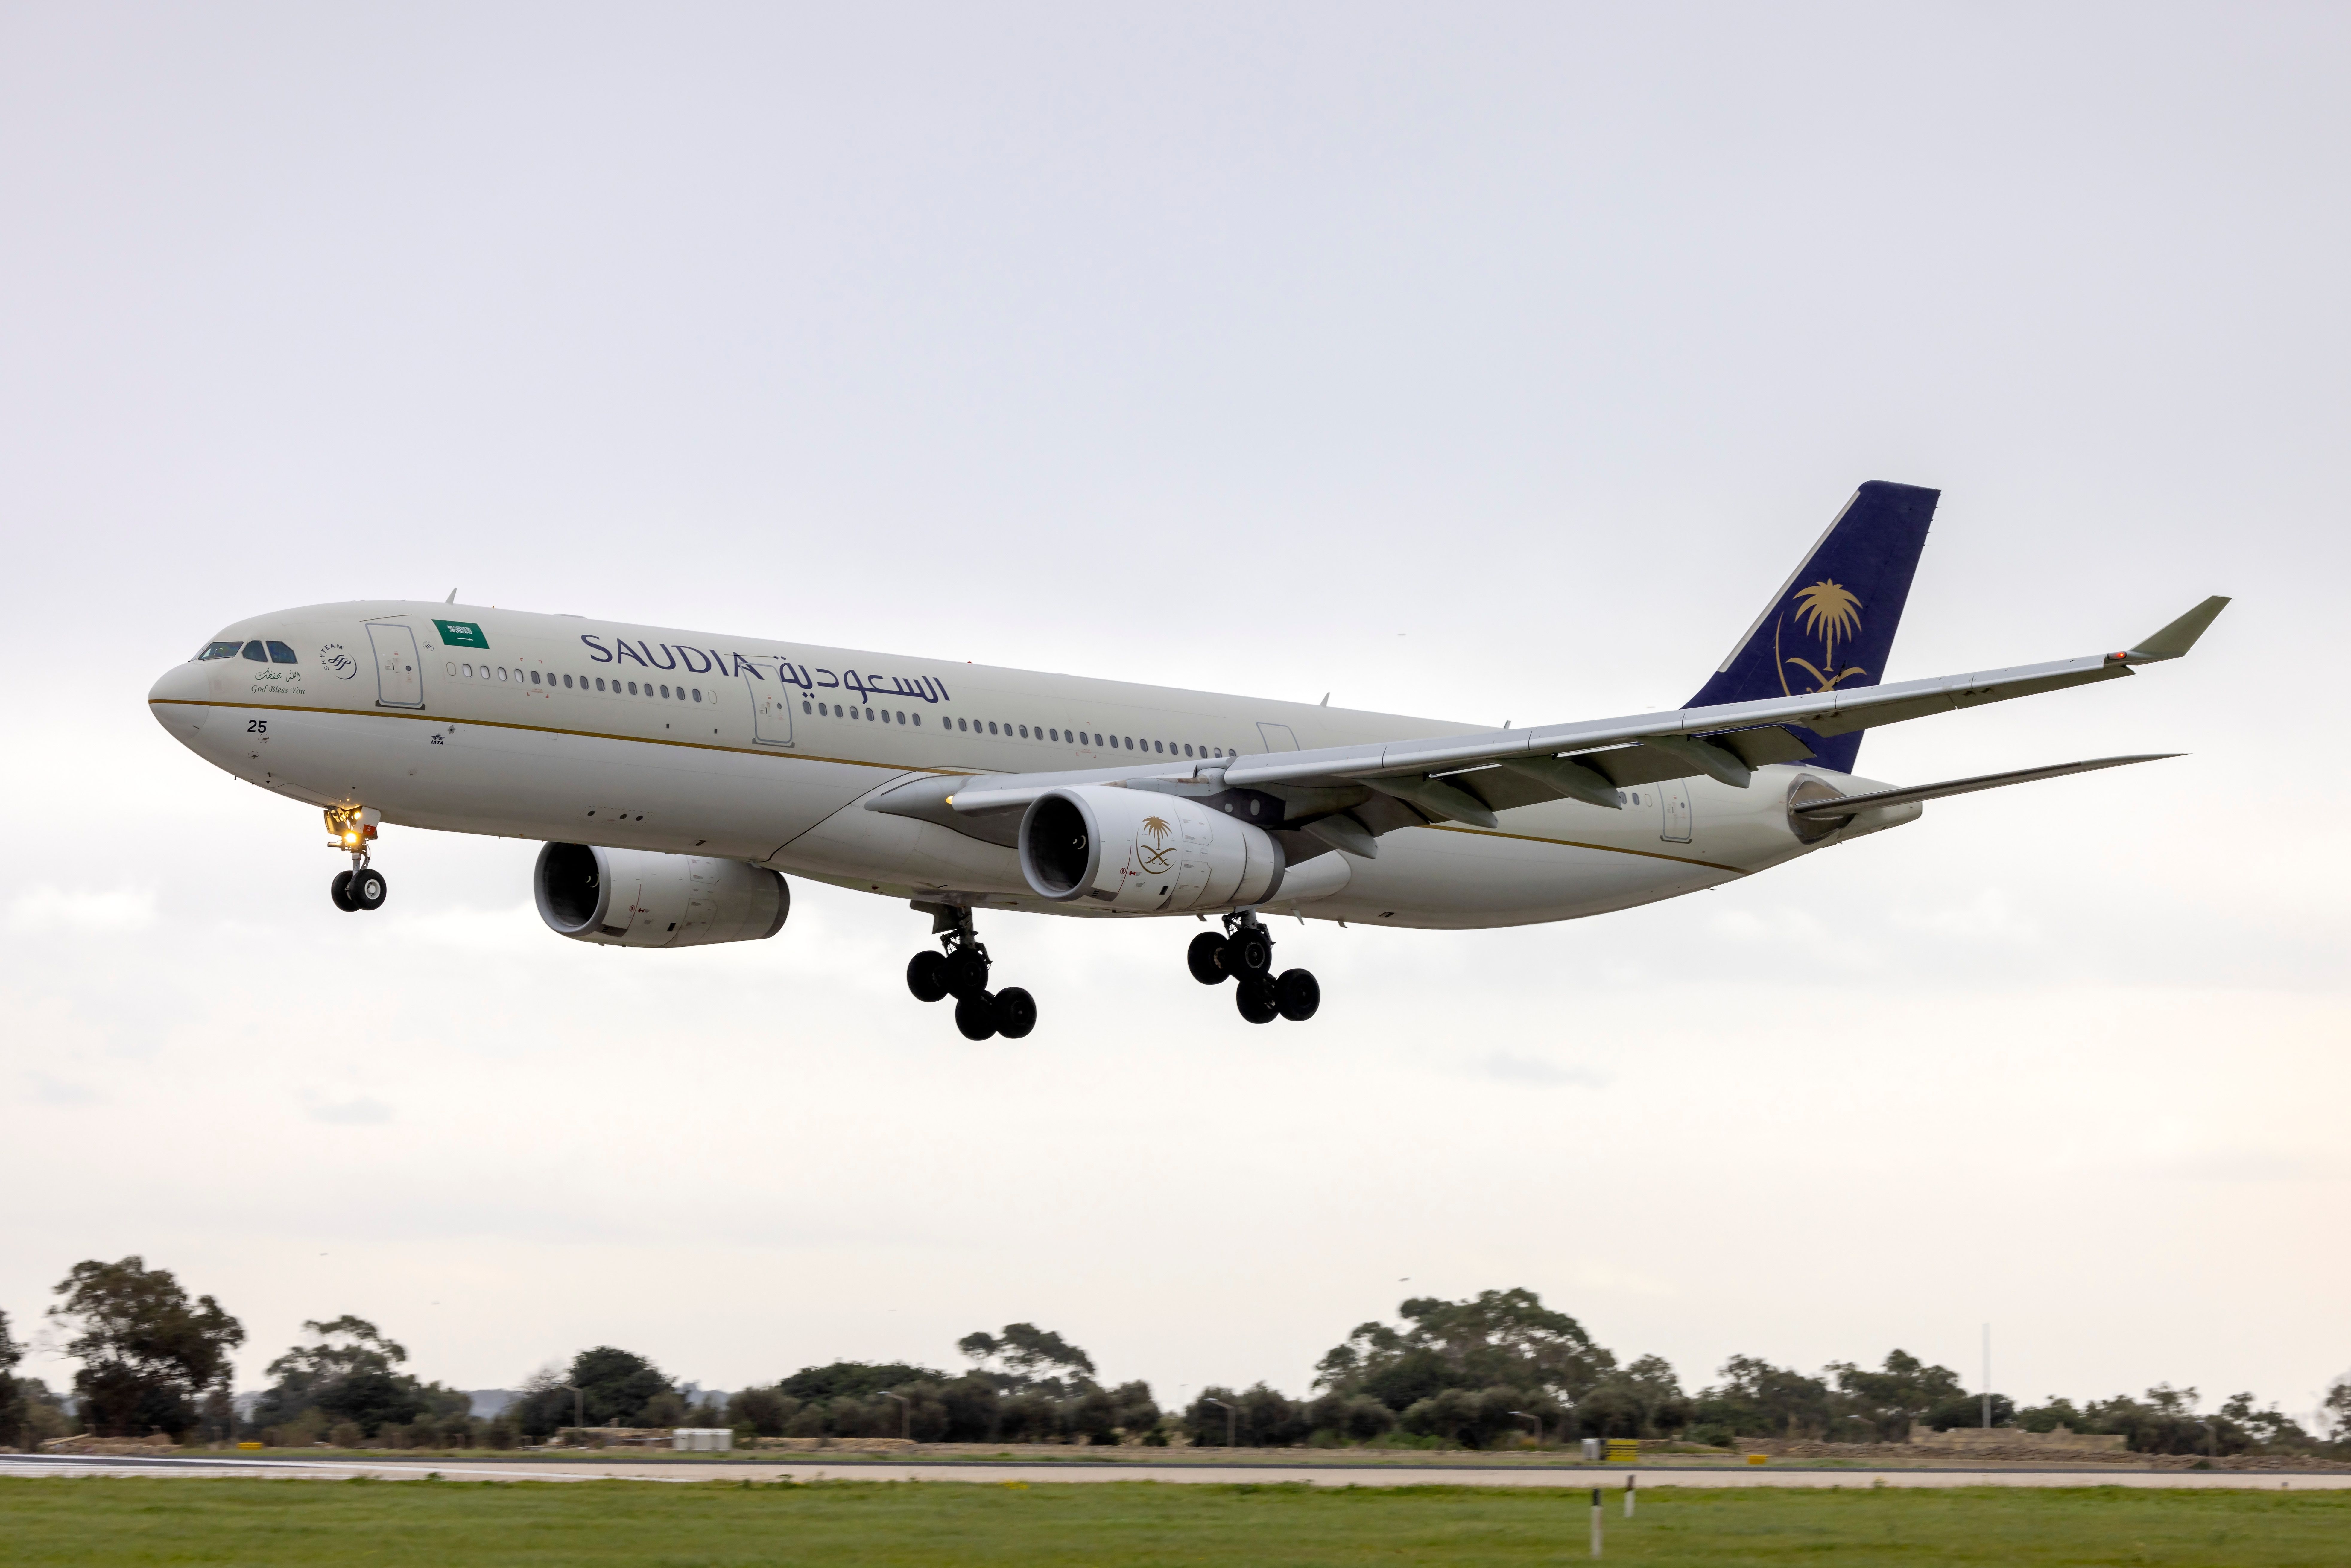 A Saudia Airlines Airbus A330-300 landing in Malta 